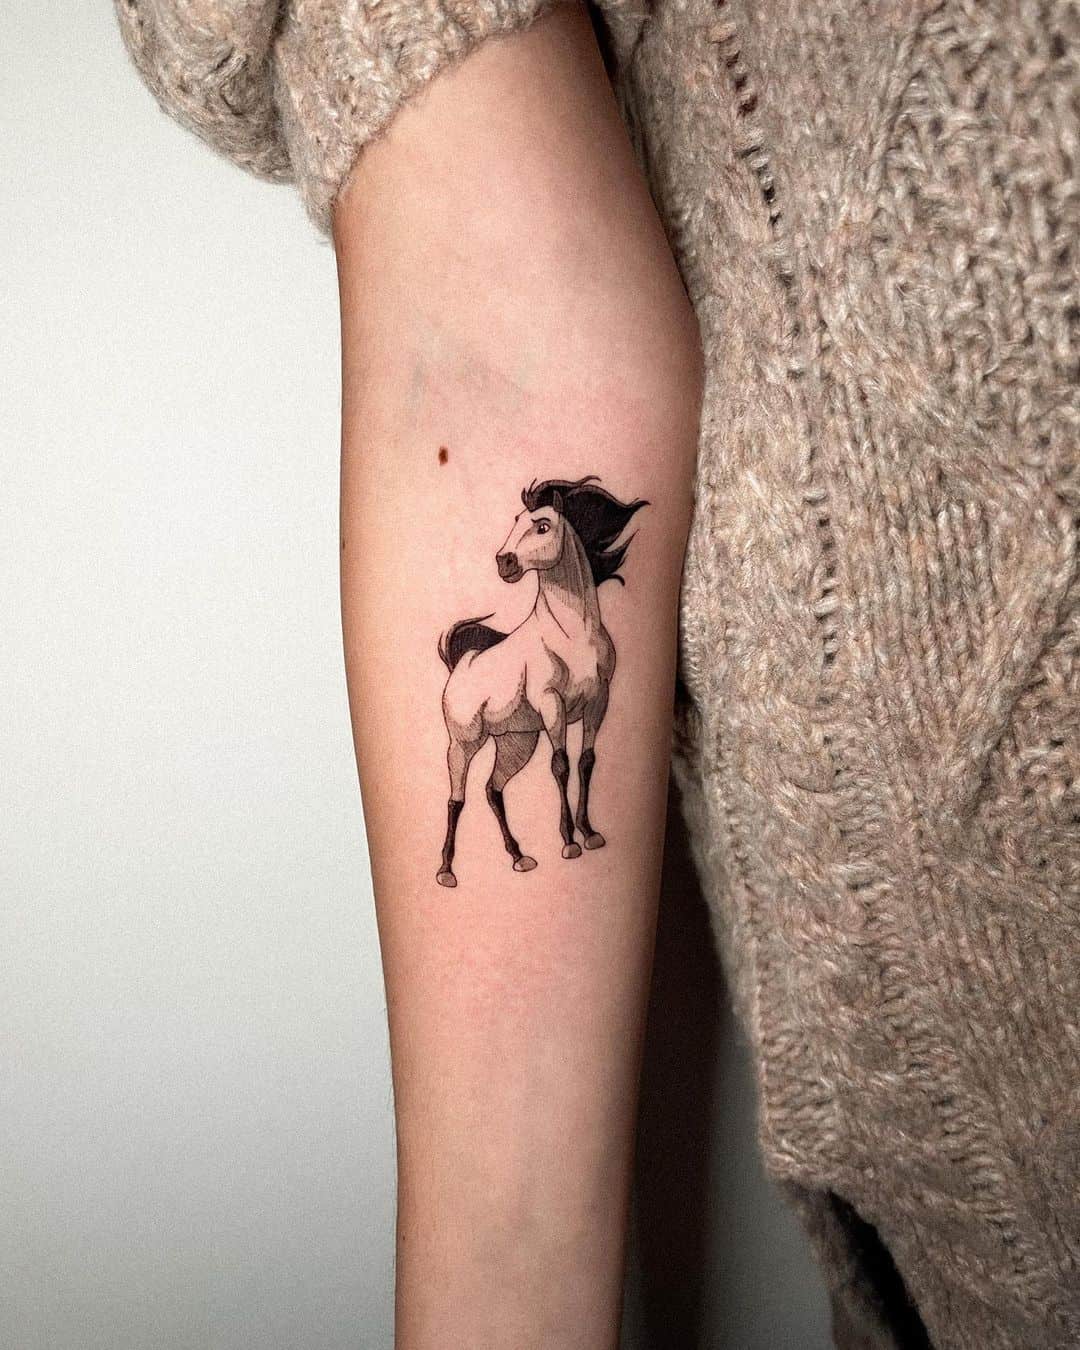 Black and white horse tattoo on arm by turner tattoos